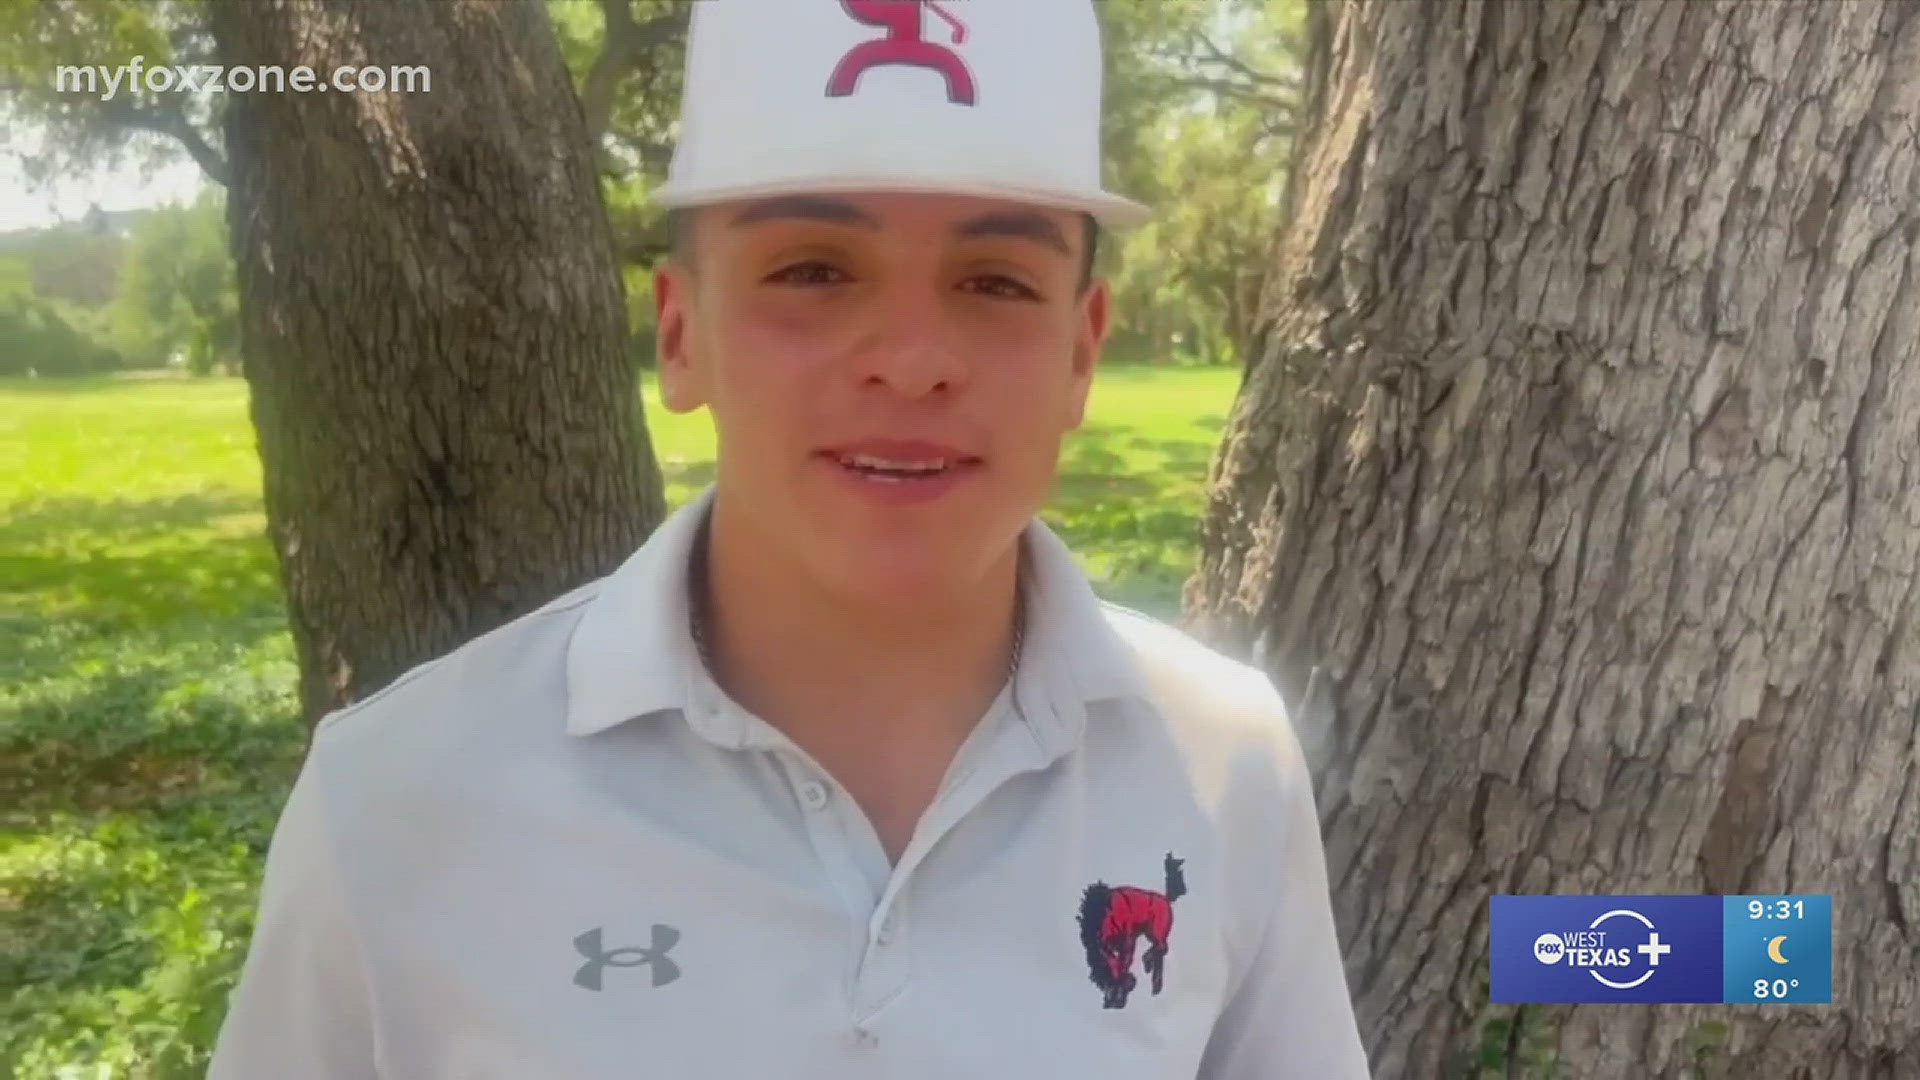 The Sonora Bronco hit a hole in one at the UIL State Tournament on Monday.